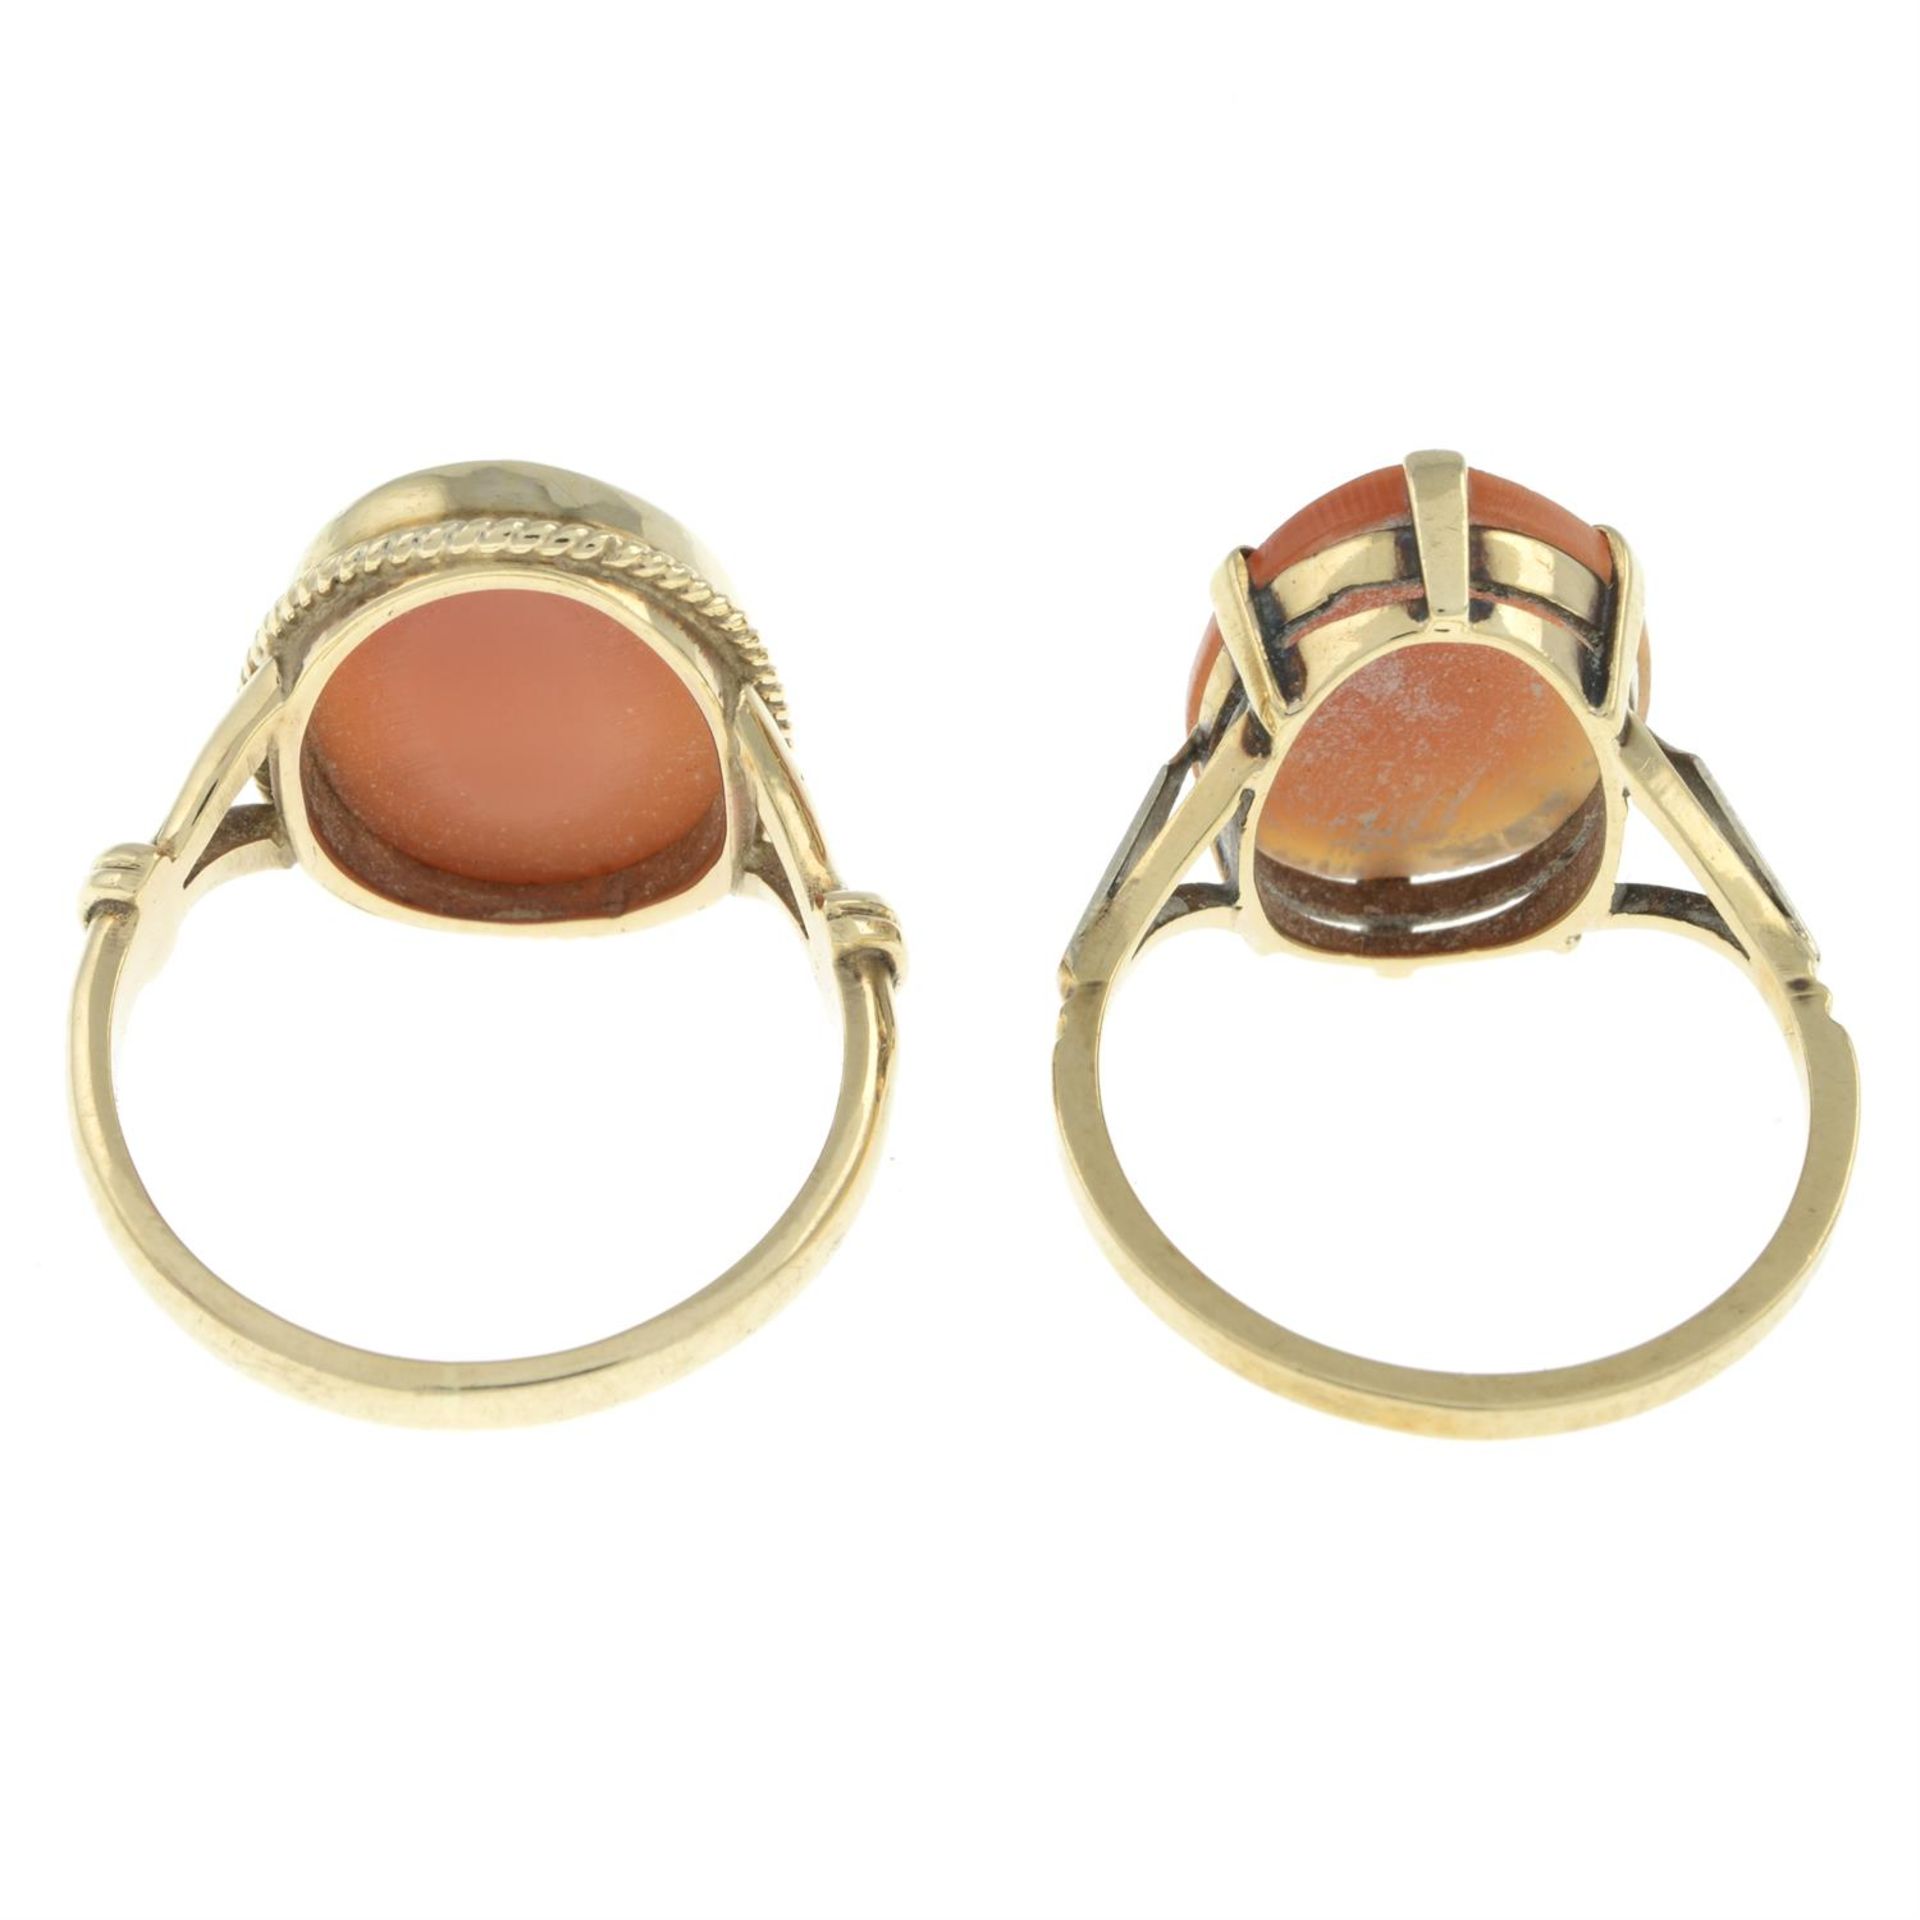 Two mid 20th century cameo rings - Image 2 of 2